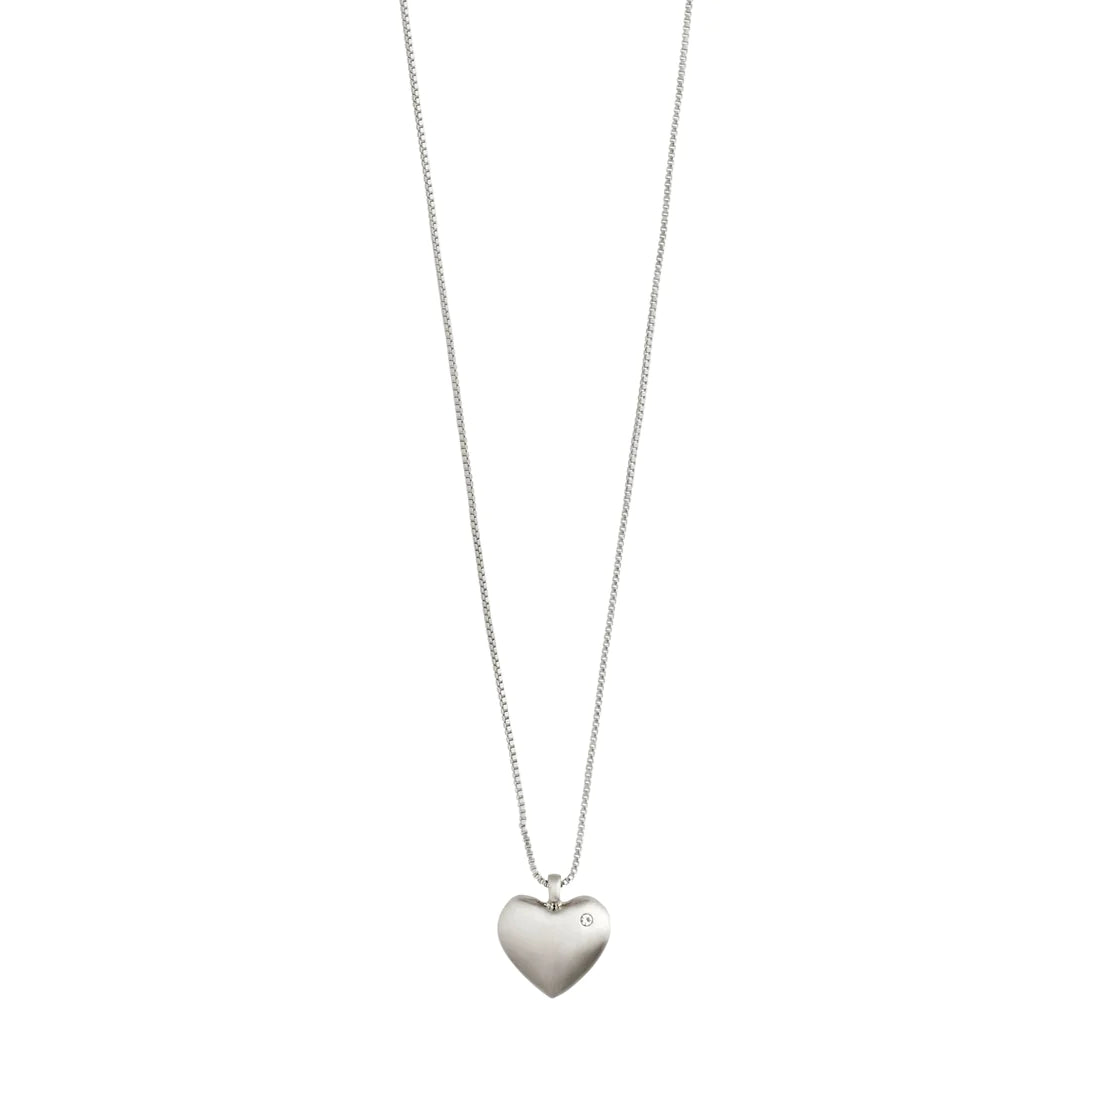 Pilgrim SOPHIA Recycled Crystal Heart Pendant Necklace Silver-Plated